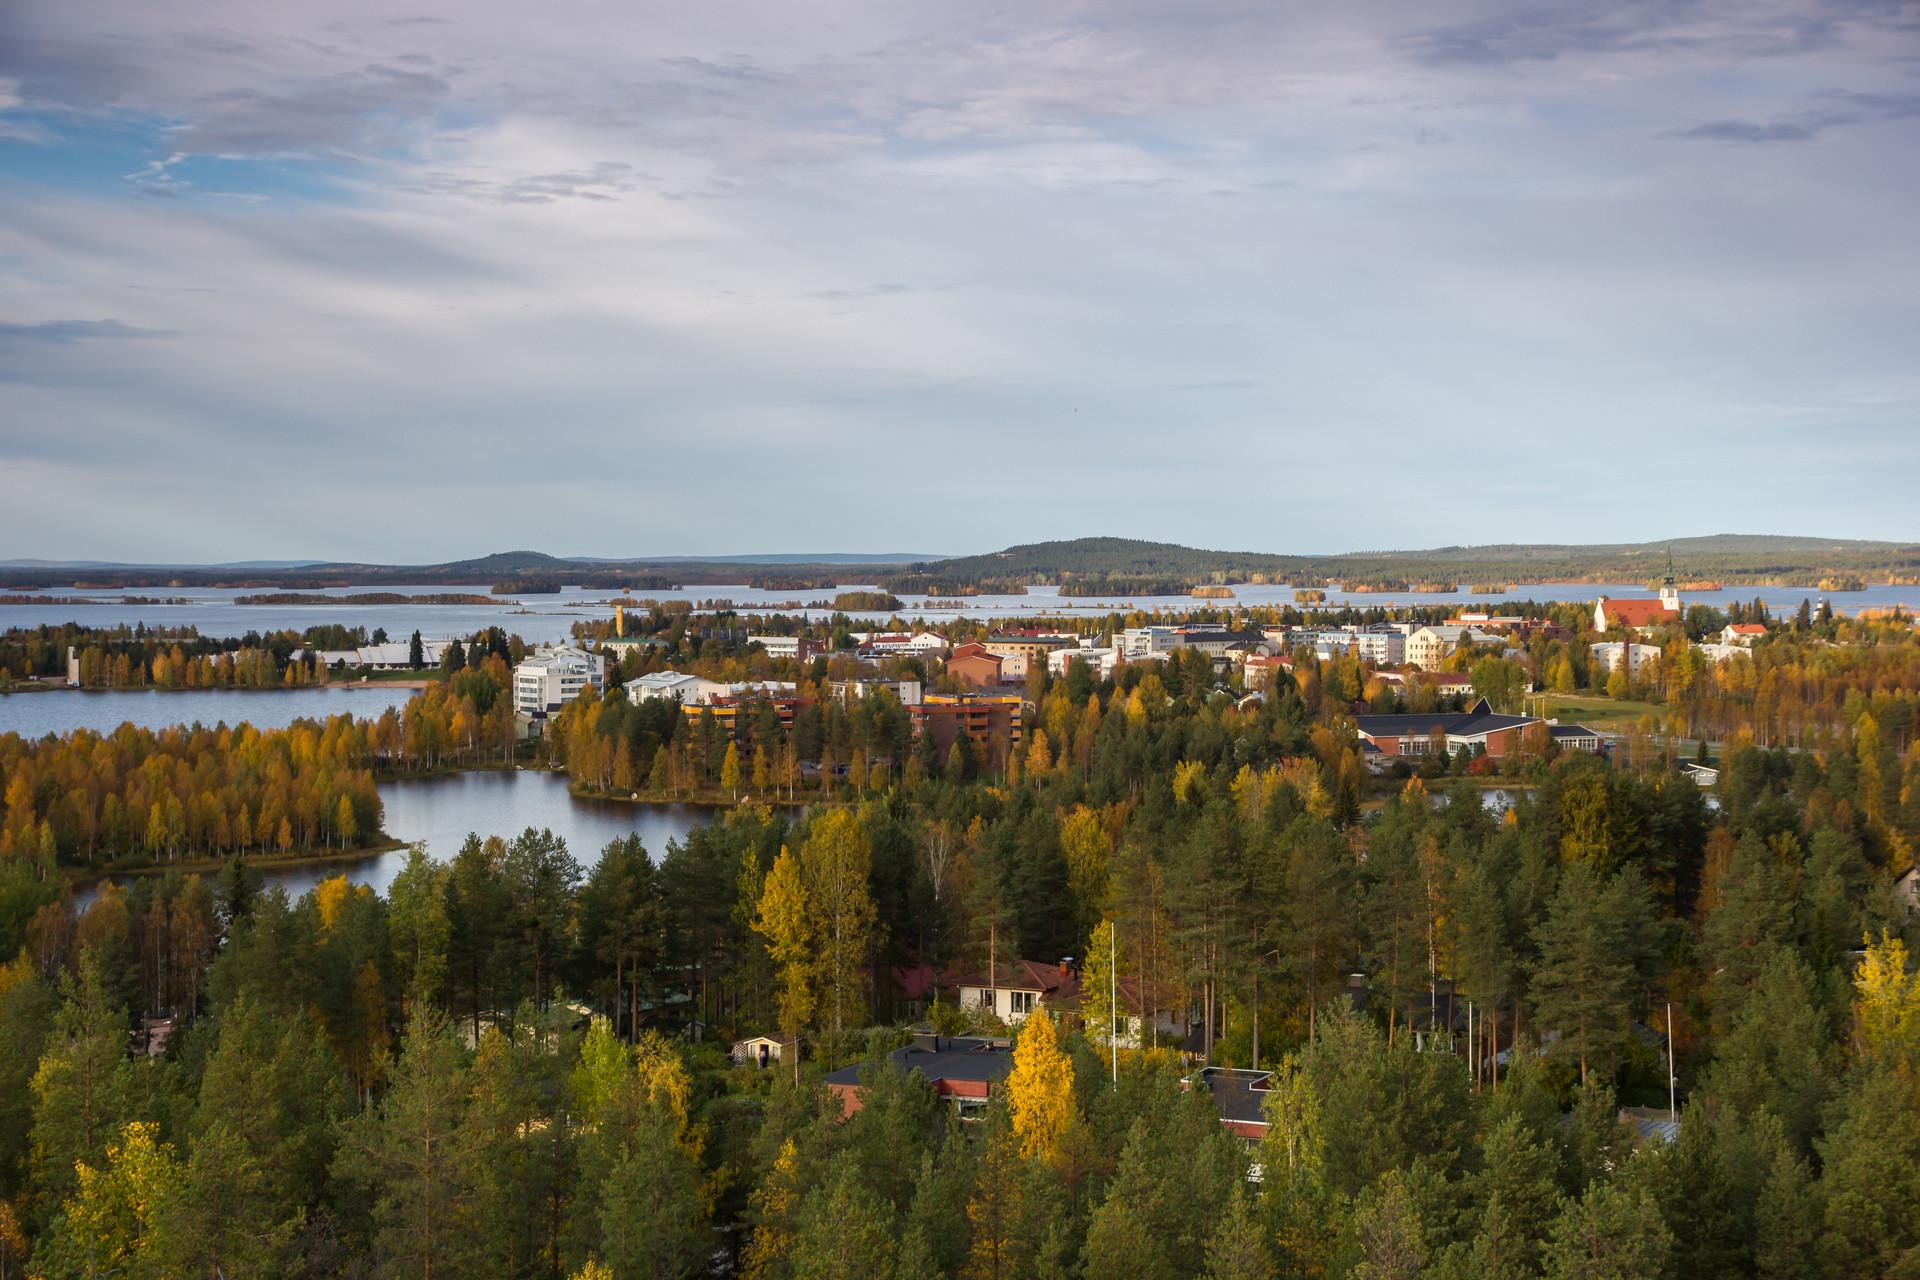 Cover image of this place Kemijärvi